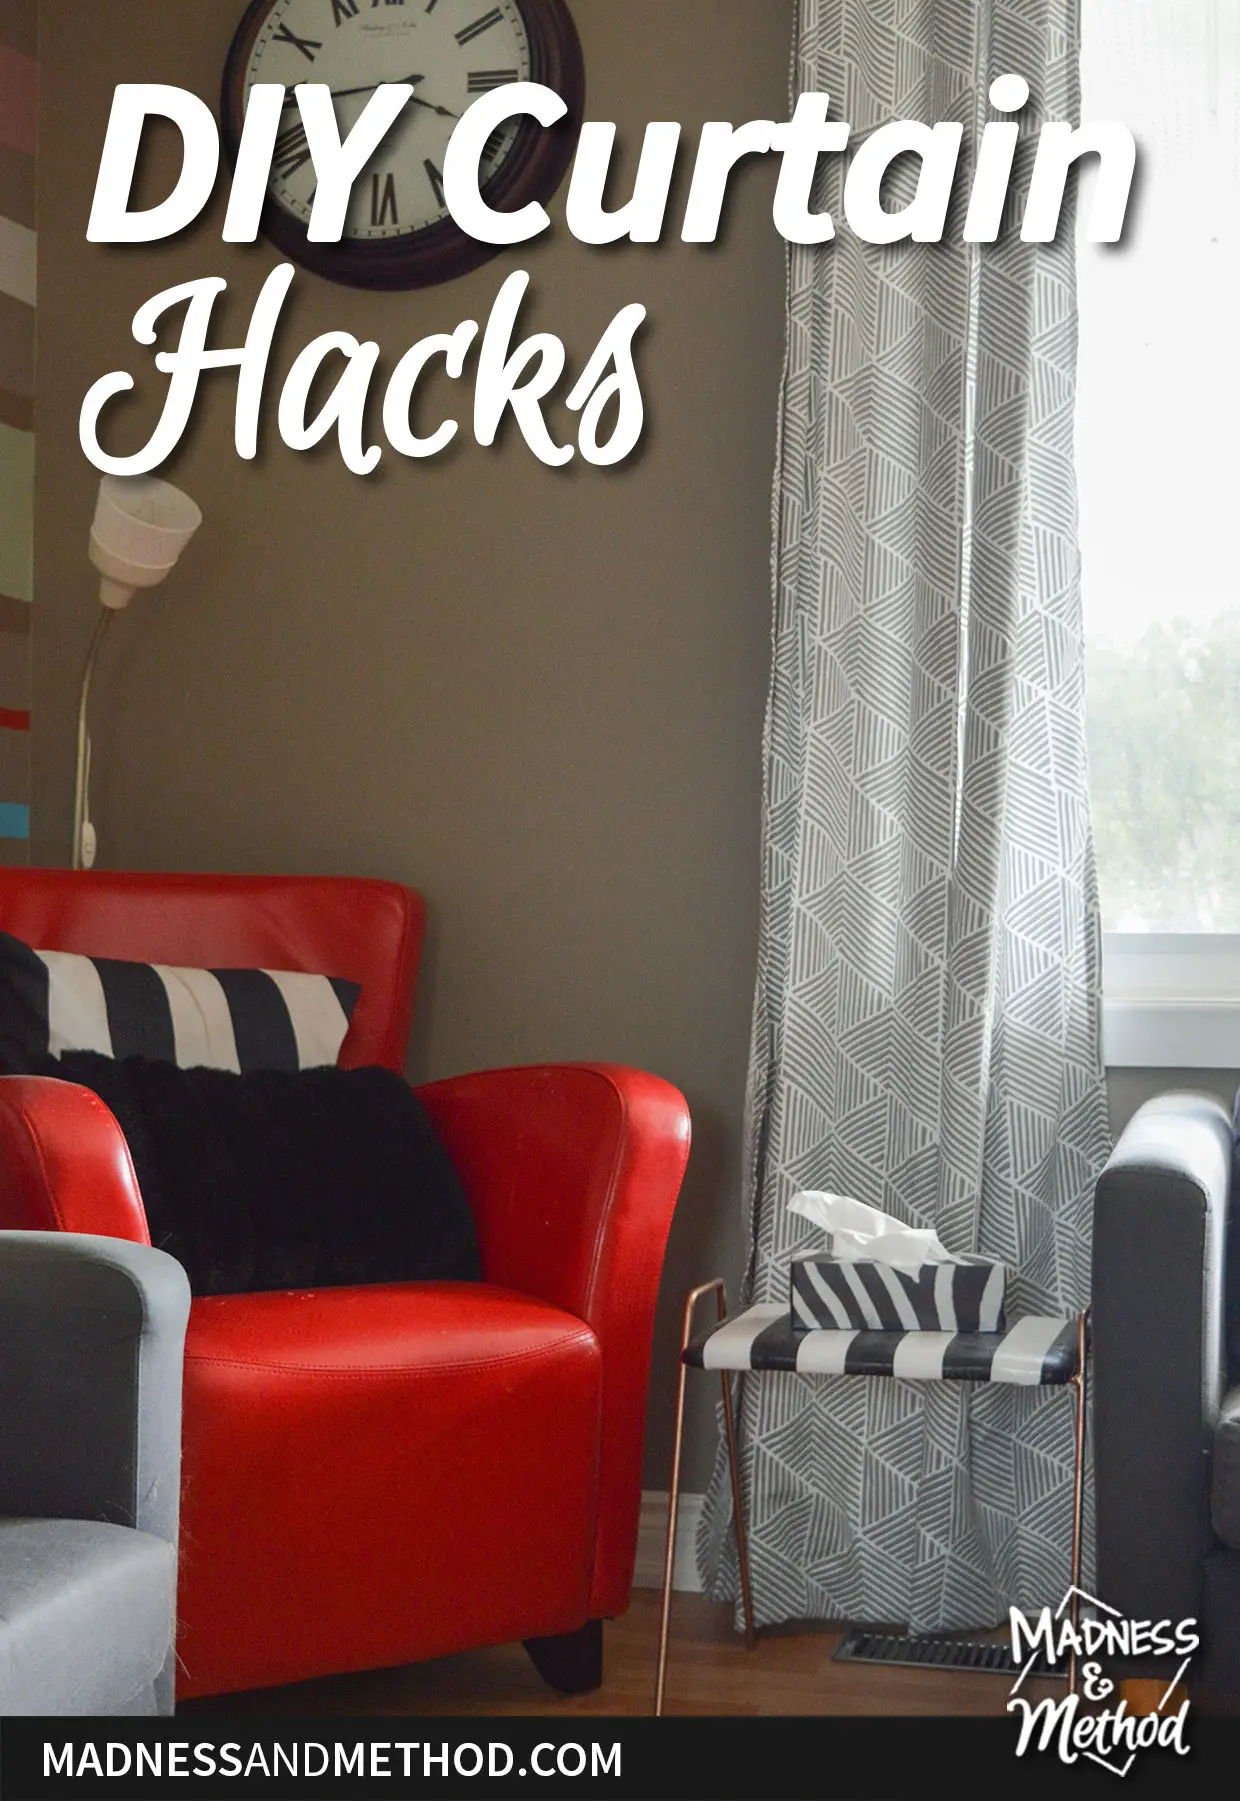 diy curtain hacks text overlay on dark taupe walls with red chair and light curtains